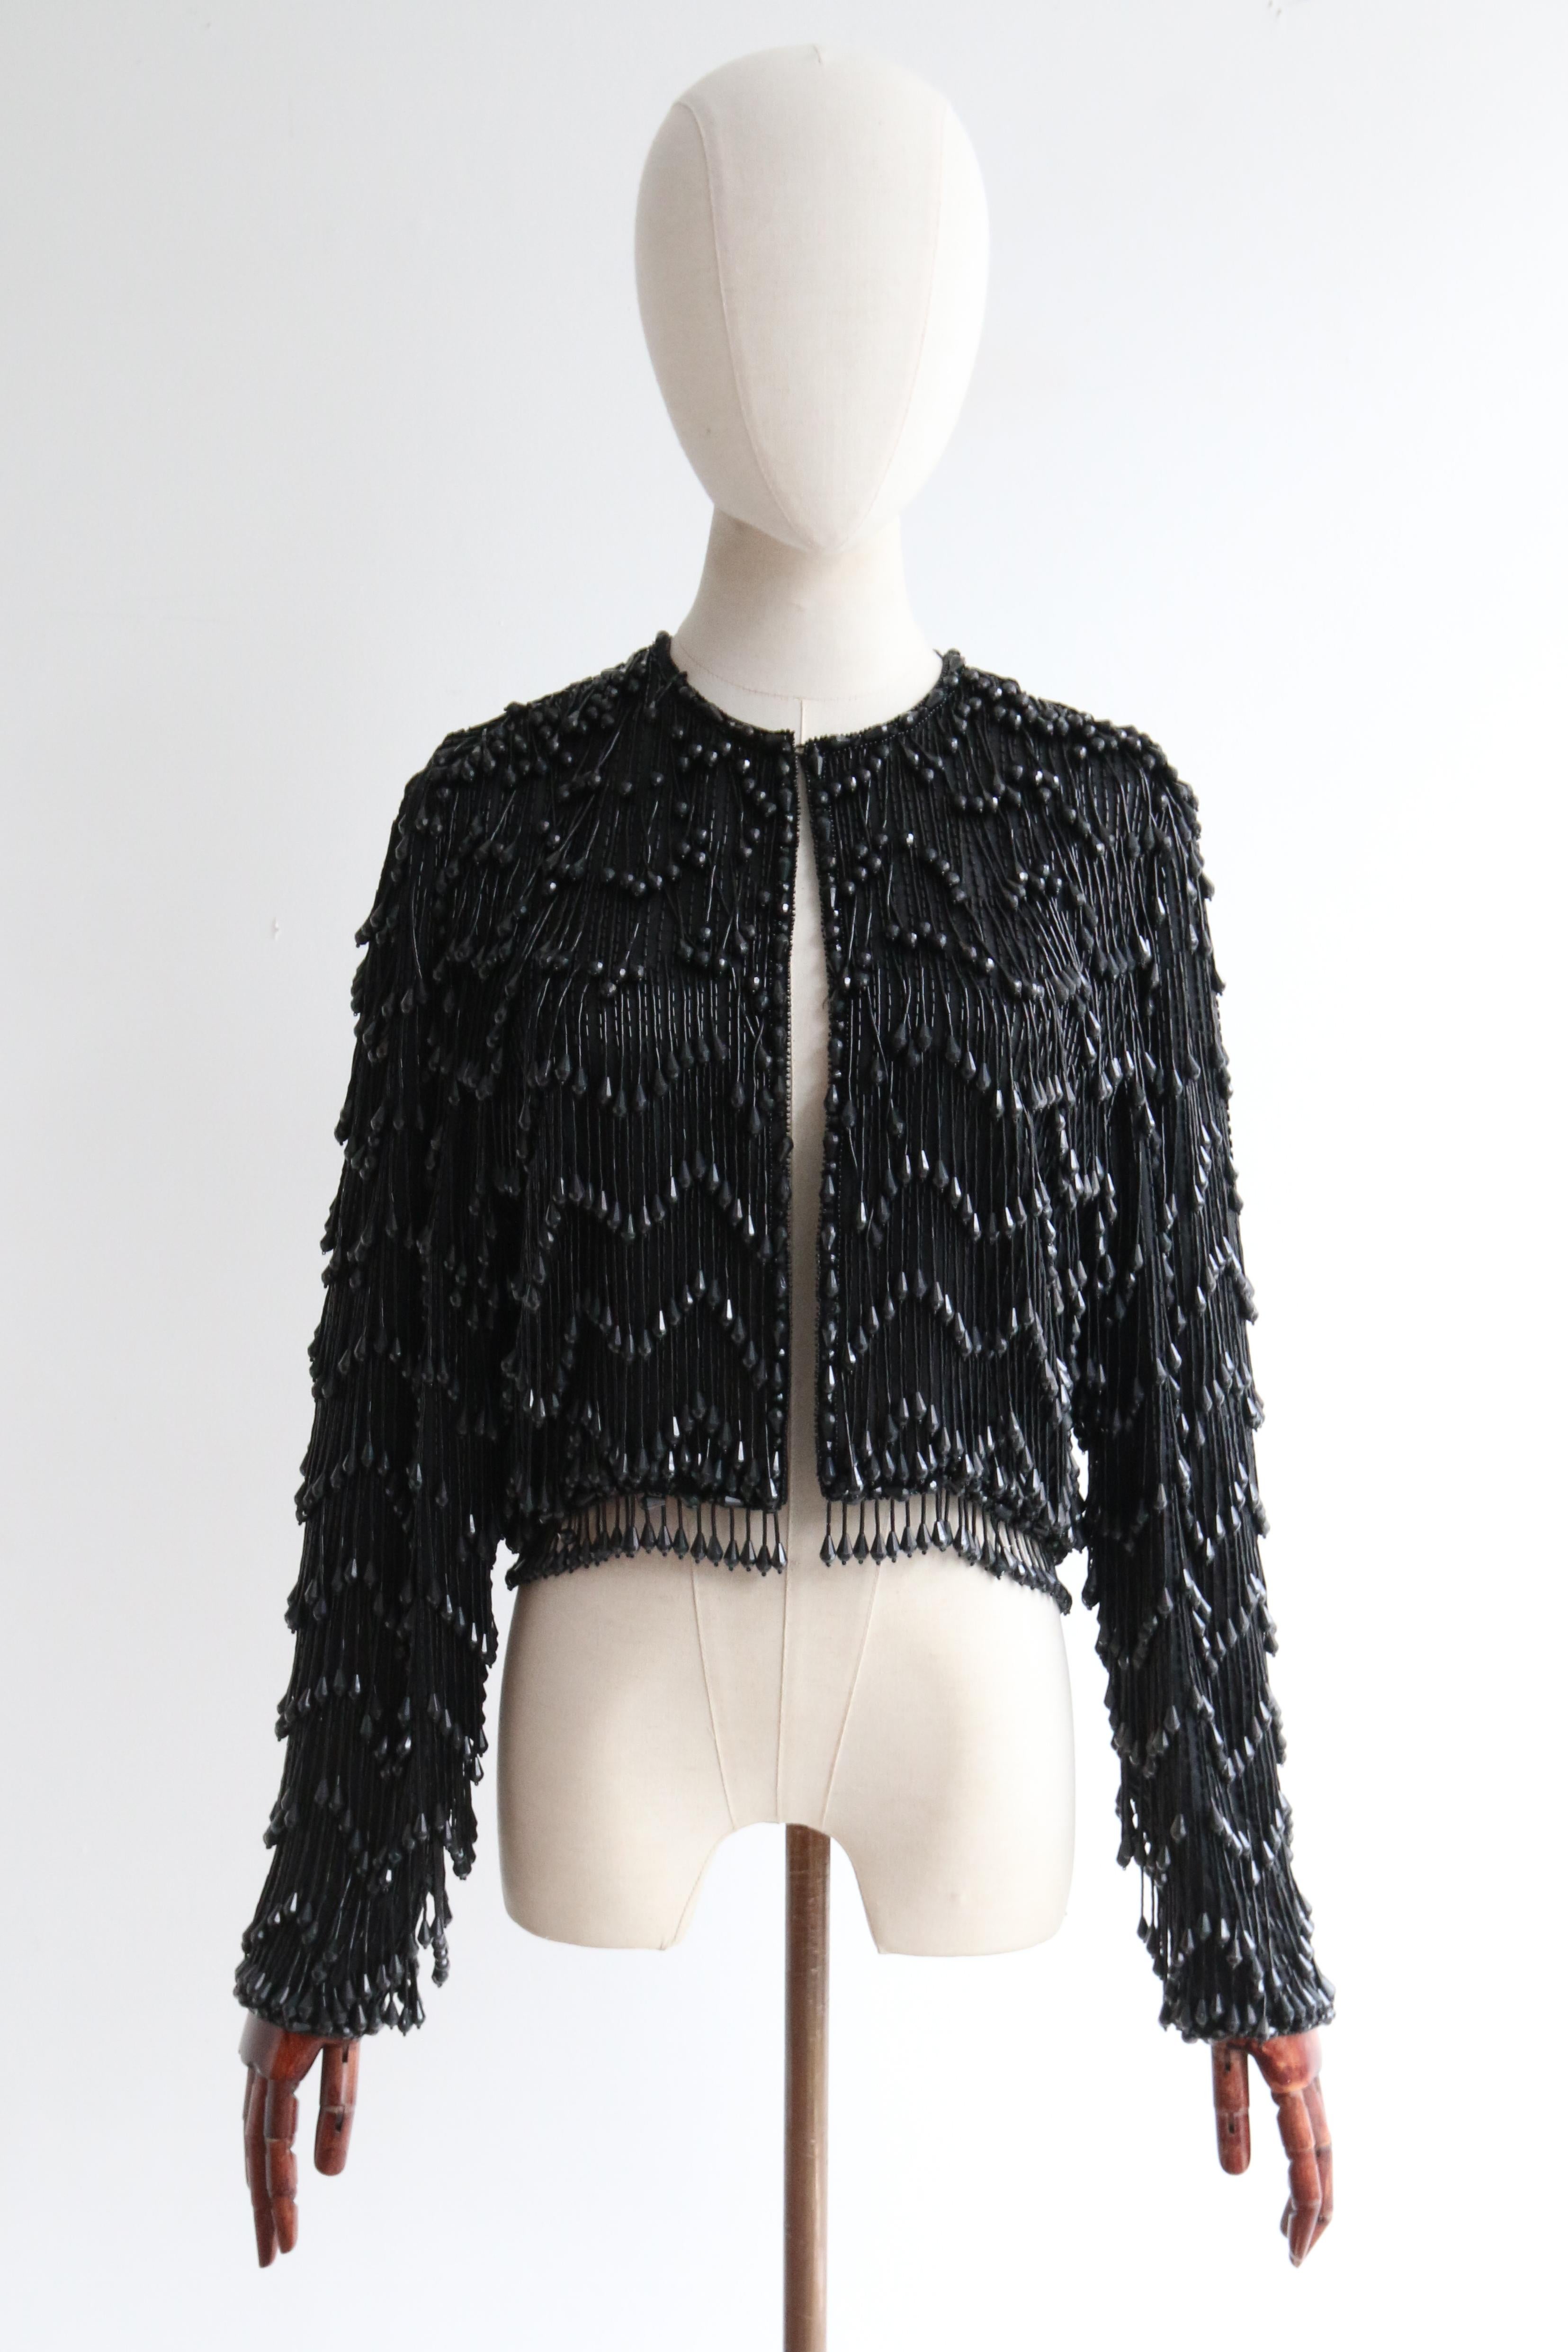 This truly mesmerising late 1960's silk chiffon based jacket by Victoria Royal LTD, fully embellished with black glass bugle beads sewn in horizontal stripes, beneath strands of black glass bugle beads finished with faceted teardrop beads in a